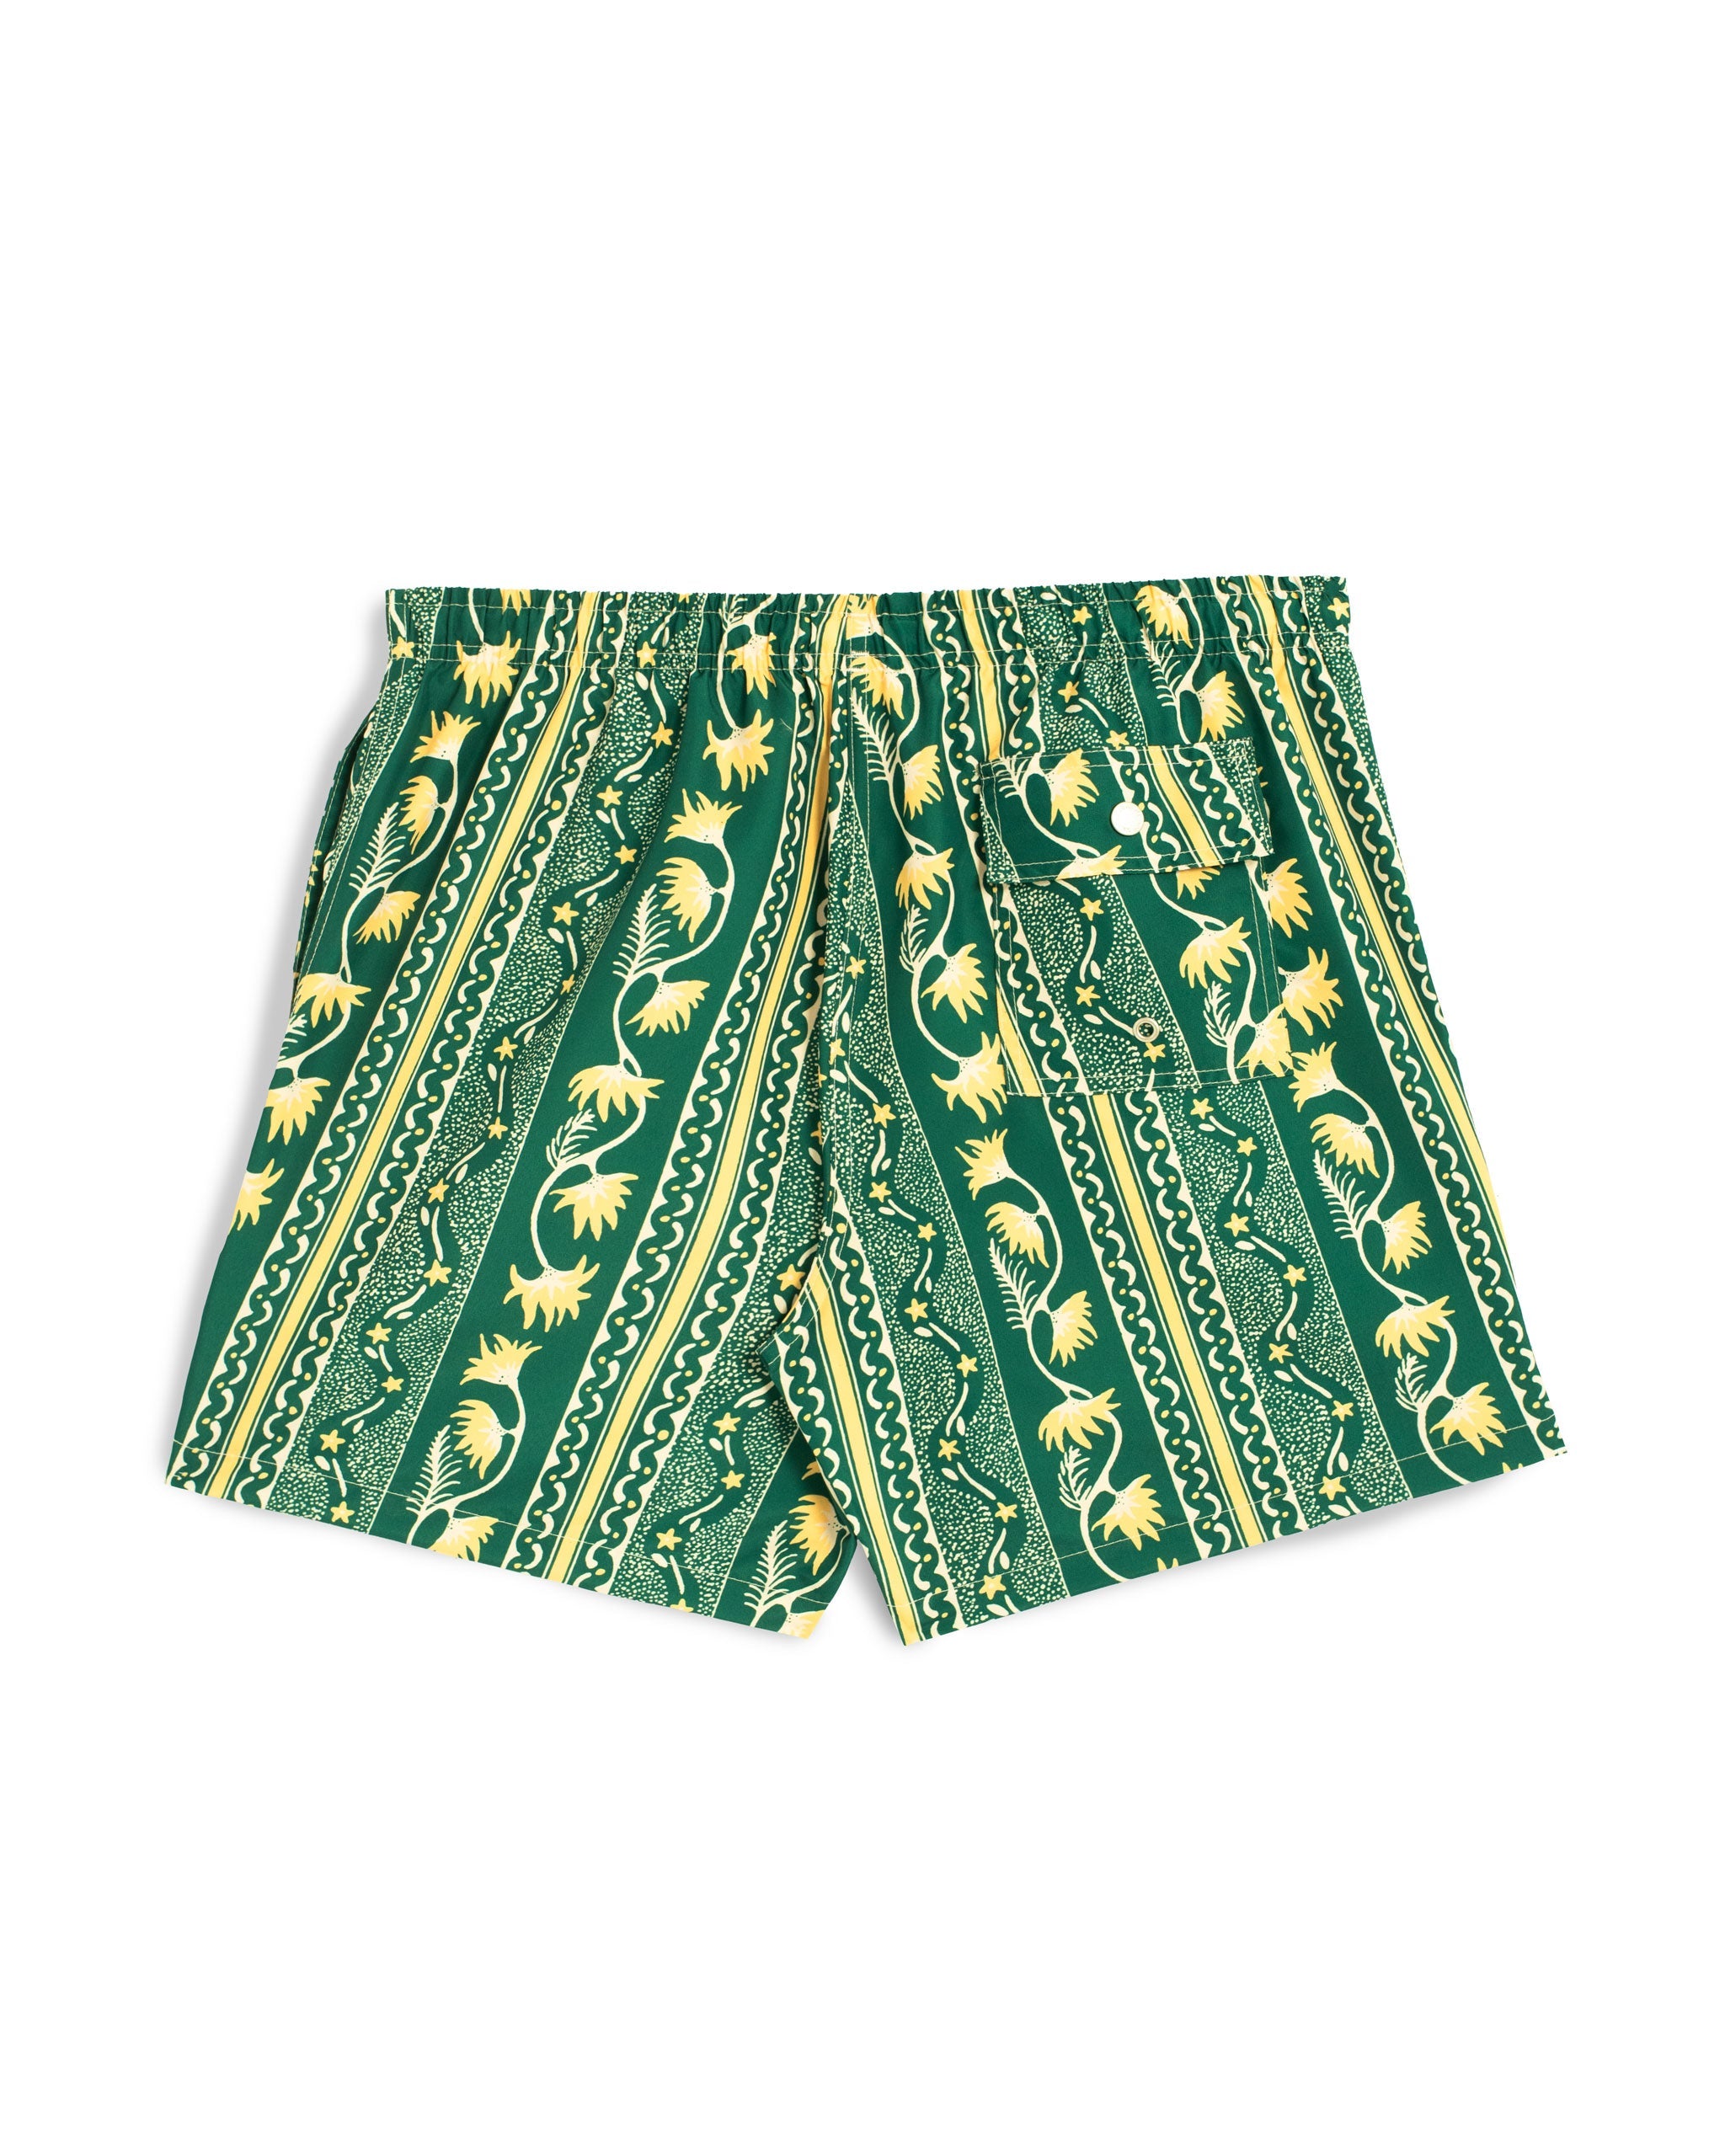 back shot of Green swim trunk with yellow and white classic stripe features intricate mosaics of flowers, sand, and starfish